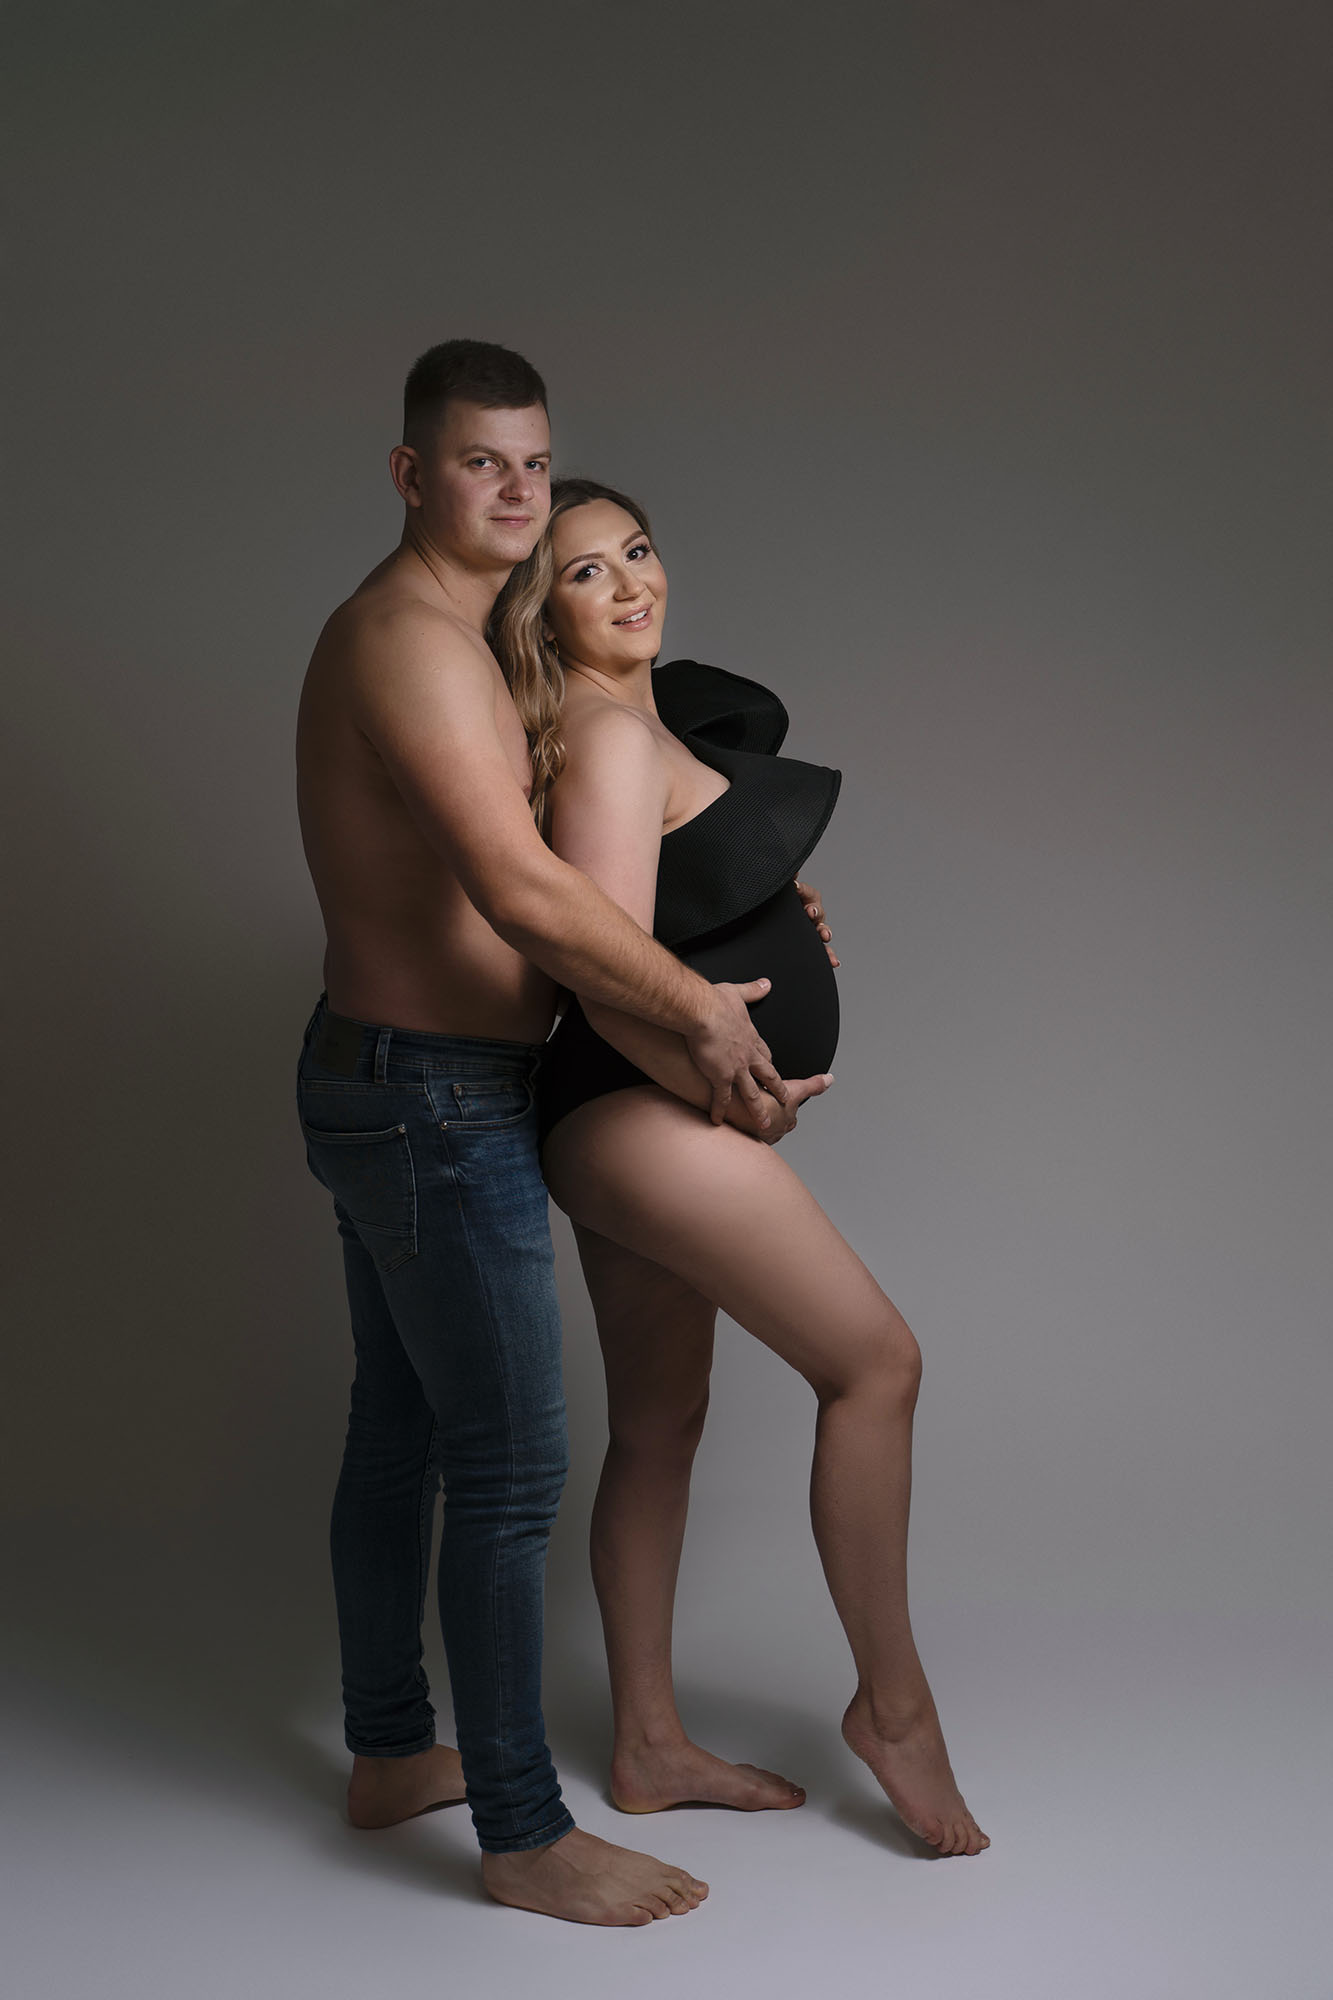 maternity photography showing Edinburgh couple posing together showing off baby bump by Beautiful Bairns Photography Edinburgh